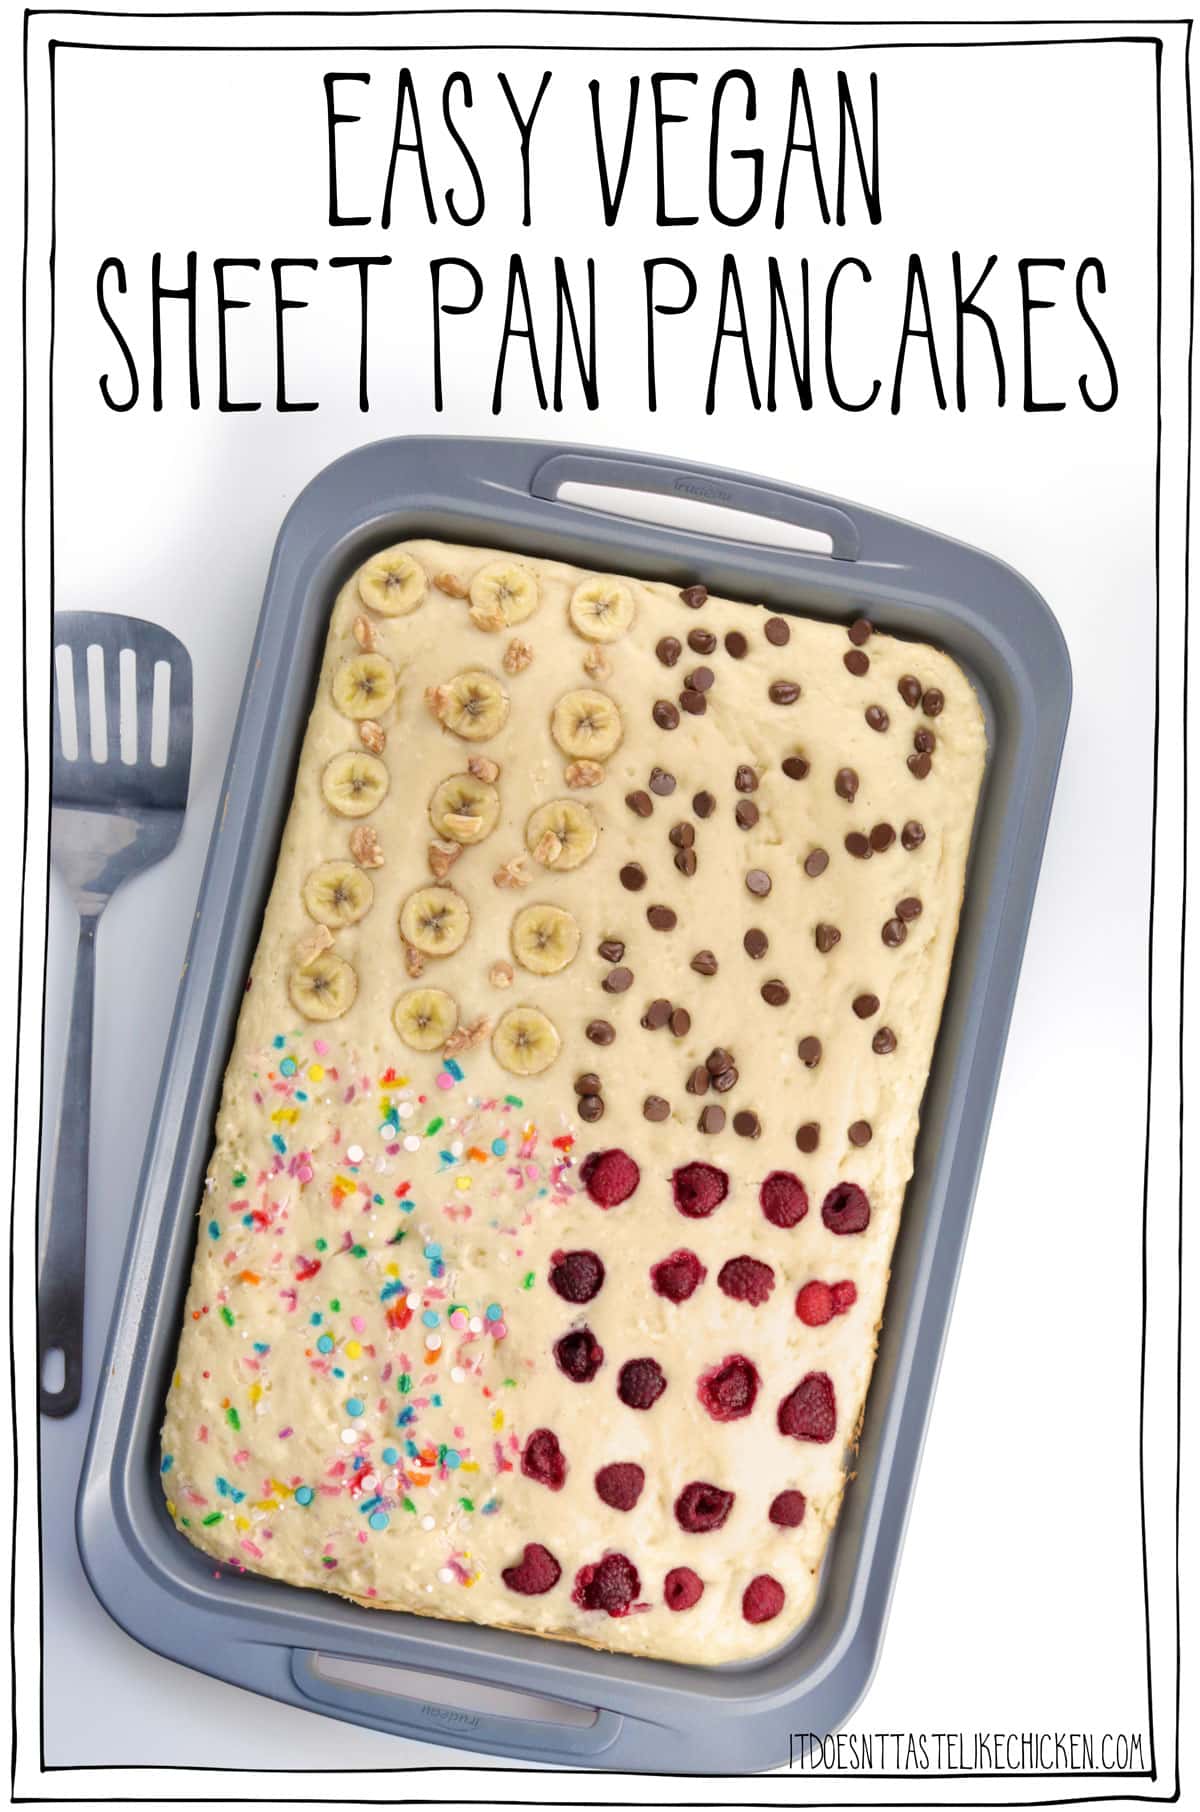 Easy Vegan Sheet Pan Pancakes! Just whip up the 8 ingredient batter made using pantry staples you likely already have on hand, spread onto a baking sheet, decorate with any toppings you like, and bake for 15 minutes. That's it! It's so simple and makes pancakes that are perfectly cooked, hot all at the same time, SUPER FLUFFY, and with endless flavour combos. #itdoesnttastelikechicken #veganrecipes #easyvegan